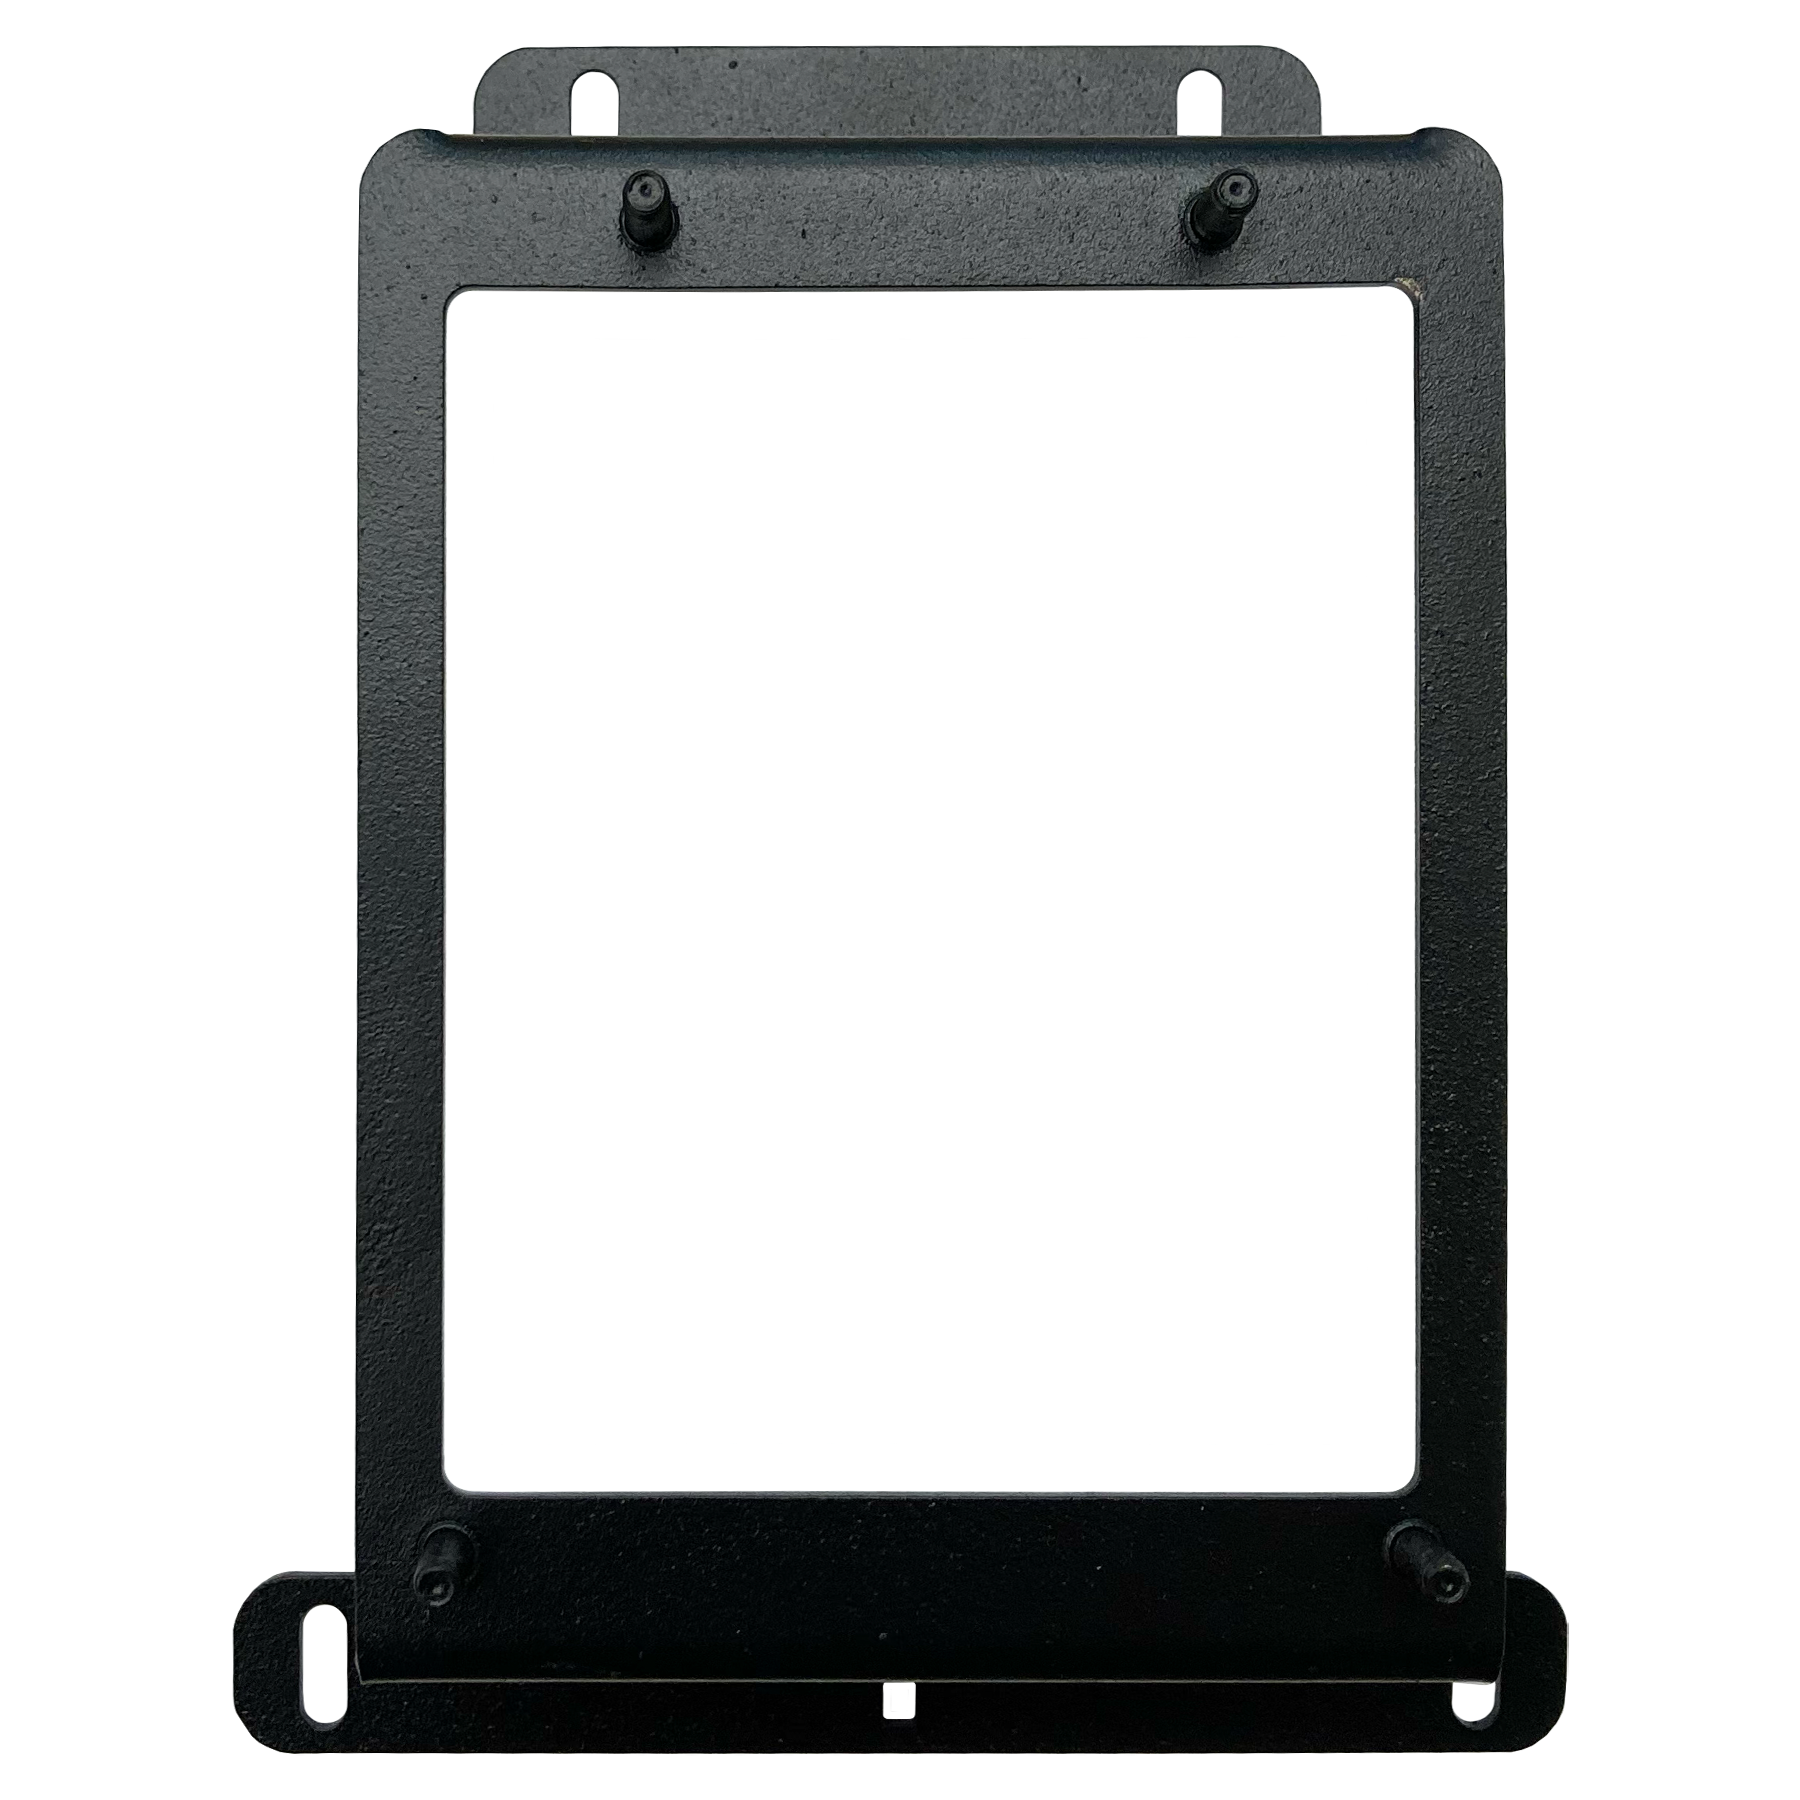 Sold by Miele Manufacturing (Miele MFG). Bill Acceptor Brackets for ICT or CPI Bill Acceptors. Pennsylvania Skill (PA Skill) is powered by Pace-O-Matic (POM) and built by Miele Manufacturing (Miele MFG).